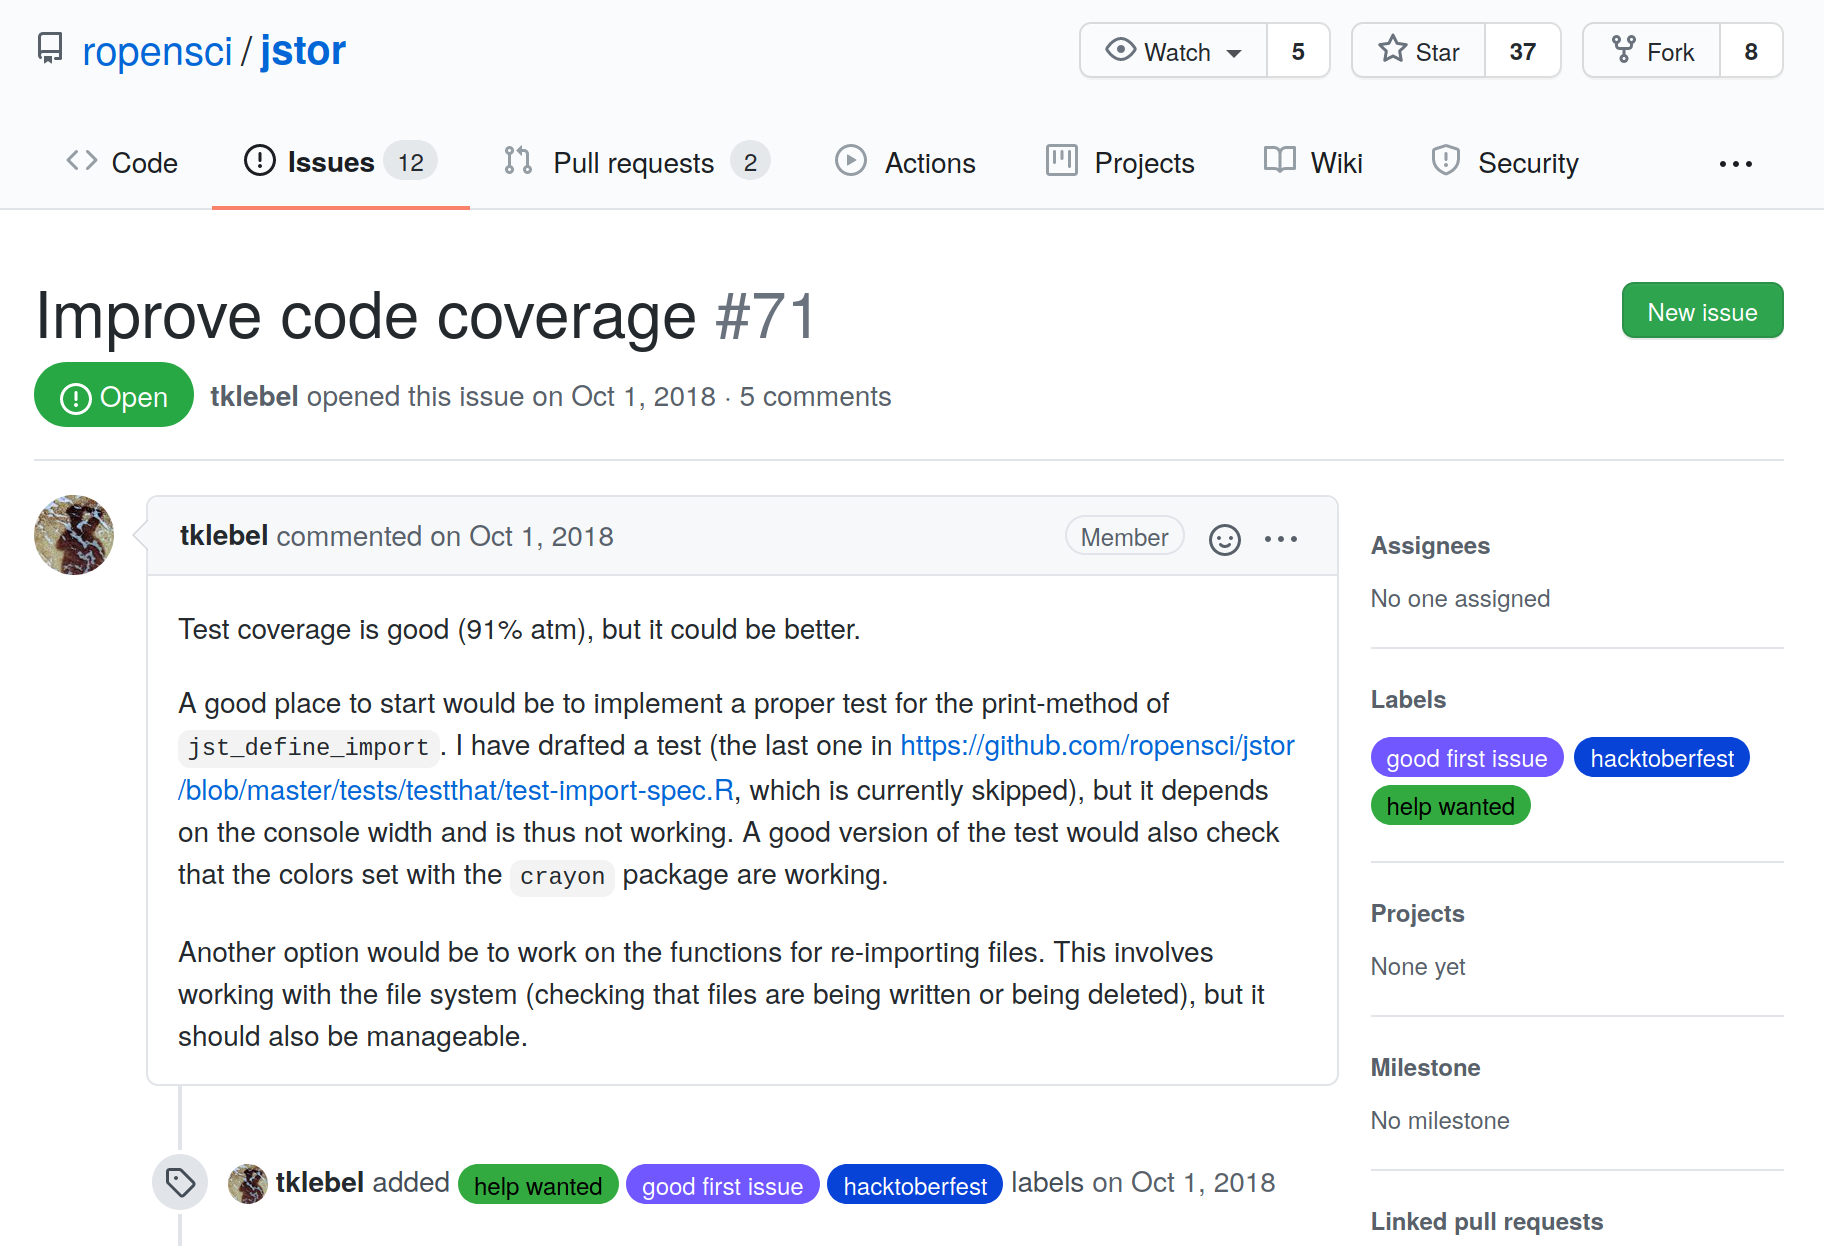 Screenshot of a Coding 'help wanted' issue called 'Improve code coverage' from the jsor package repository on GitHub